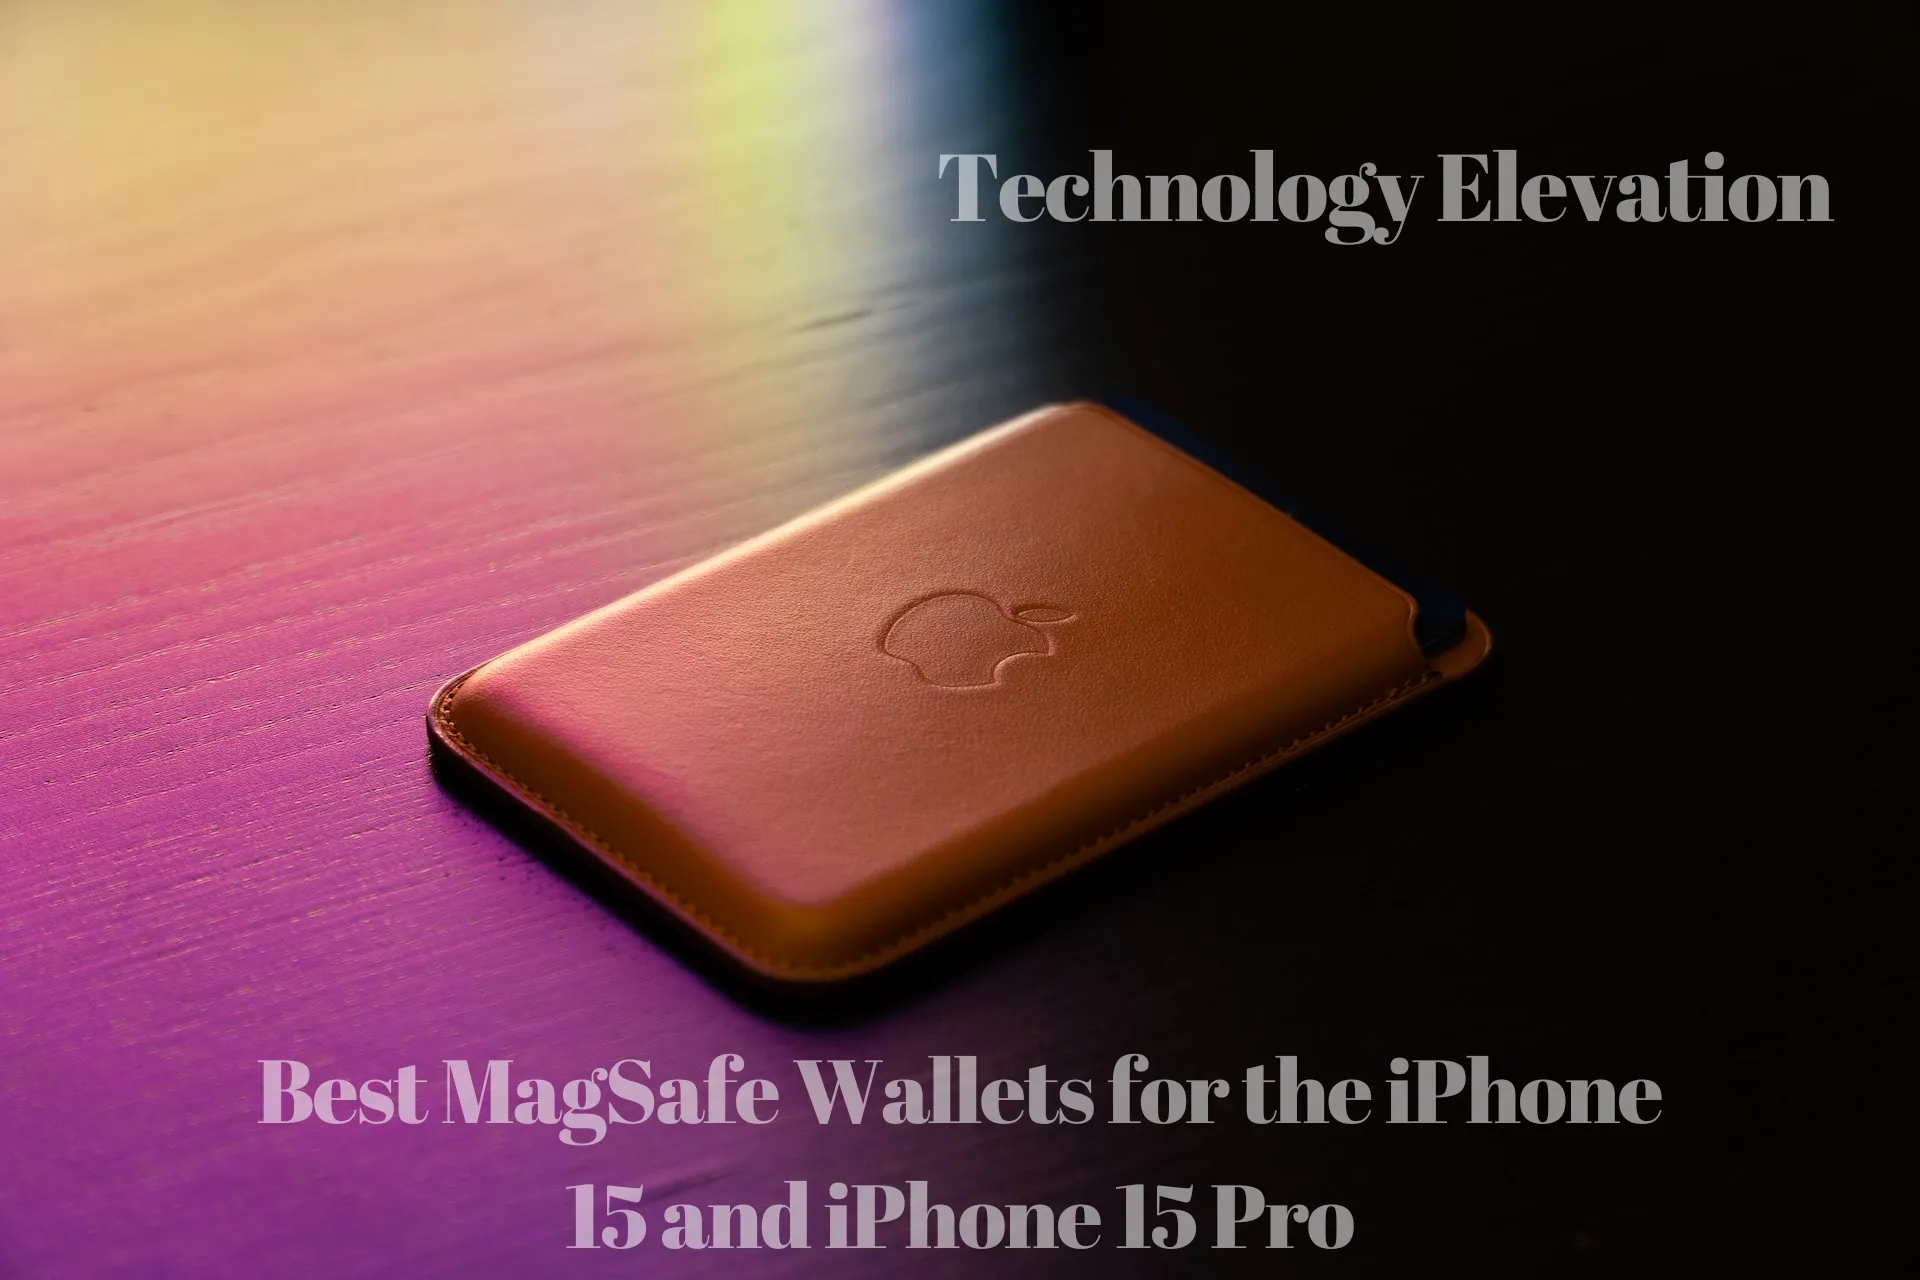 Best MagSafe Wallets for the iPhone 15 and iPhone 15 Pro